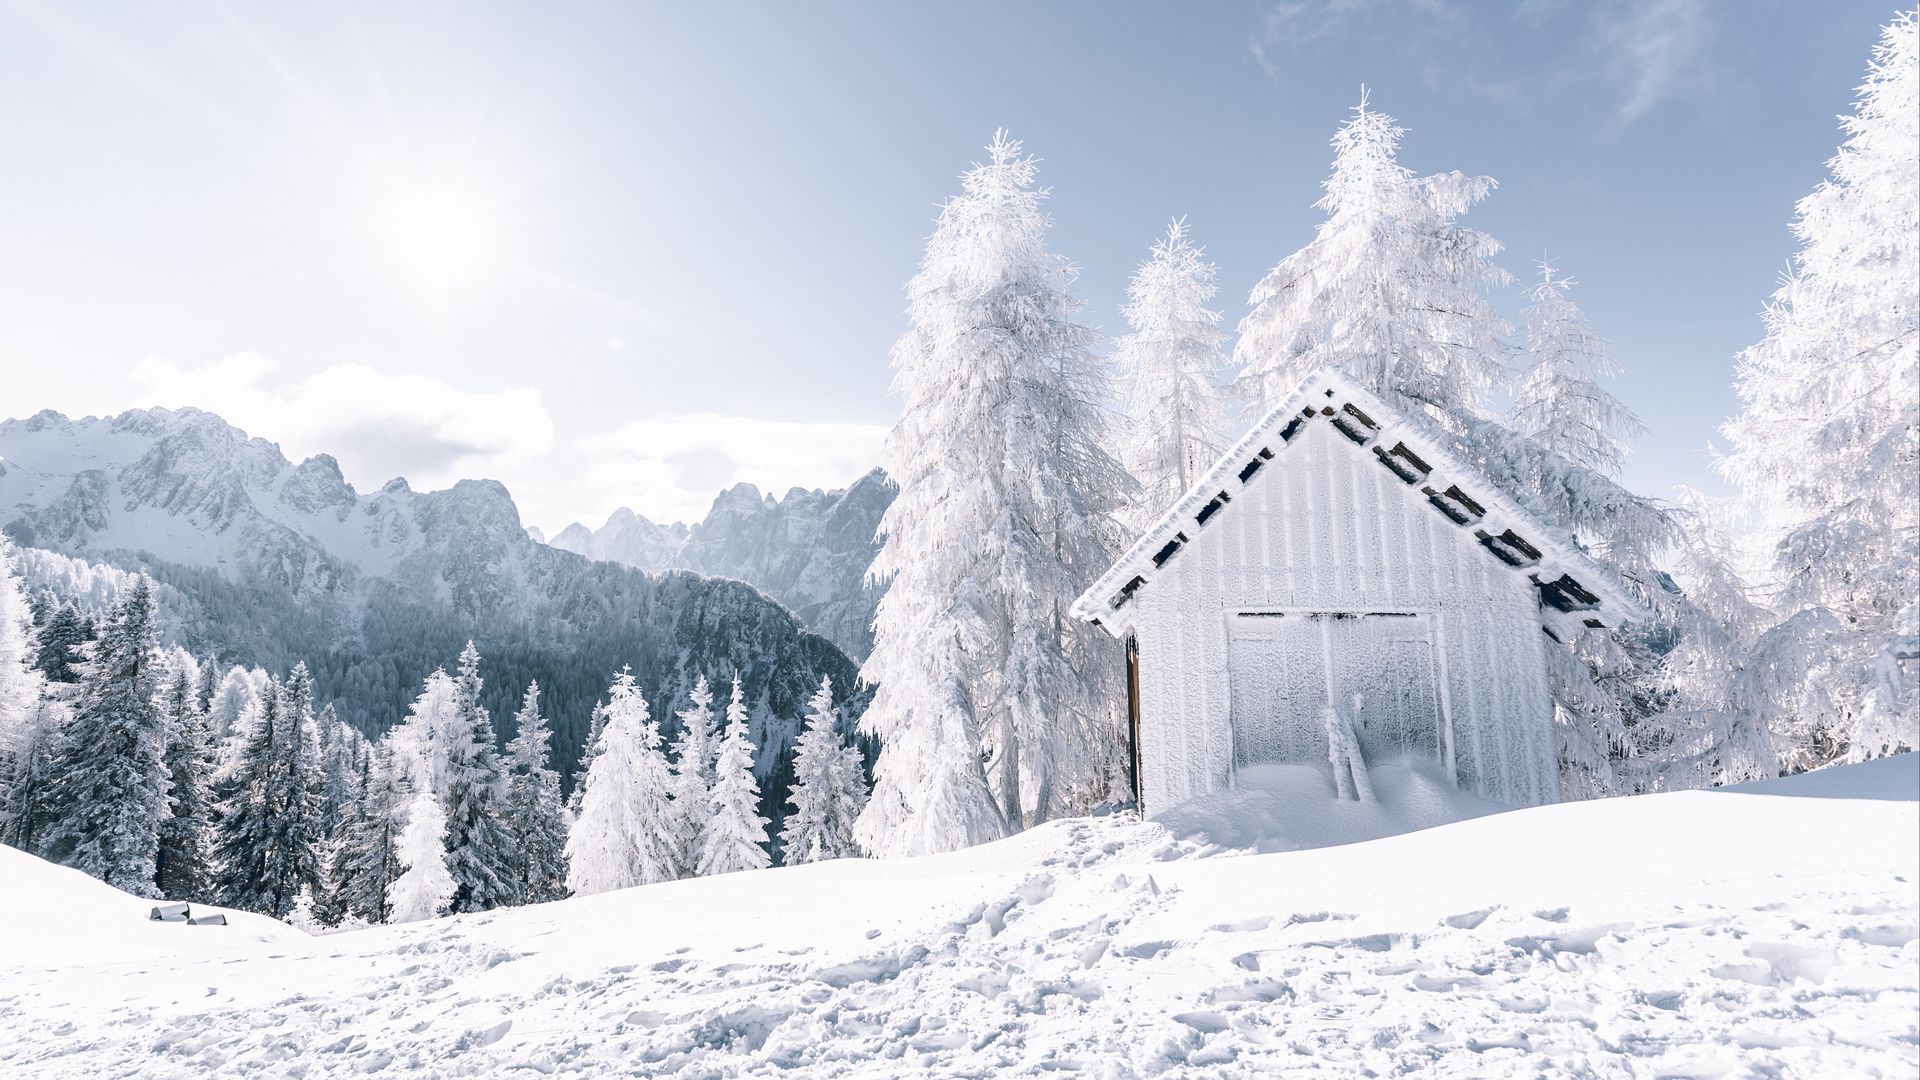 Download wallpaper 1920x1080 mountains, snow, winter, building